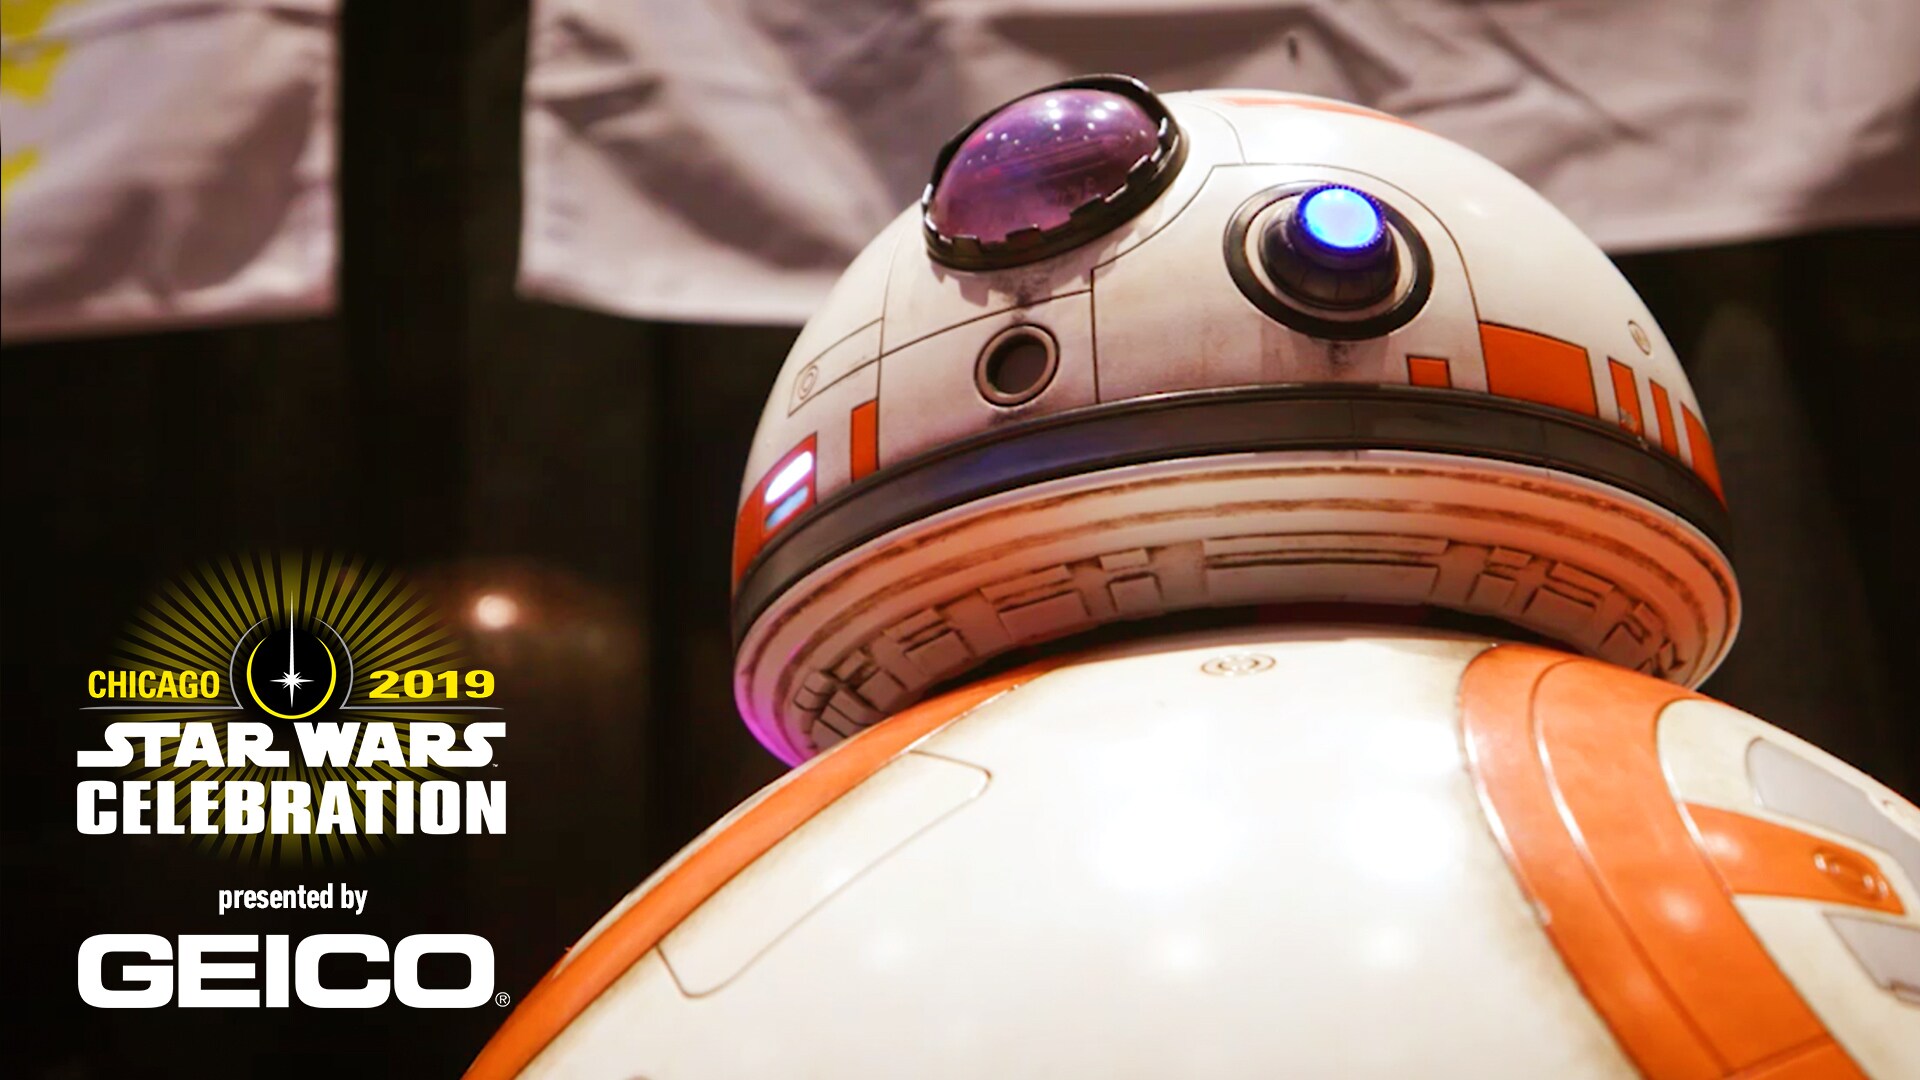 Unbelievable Droid Building at Star Wars Celebration - A Star Wars Show Extra